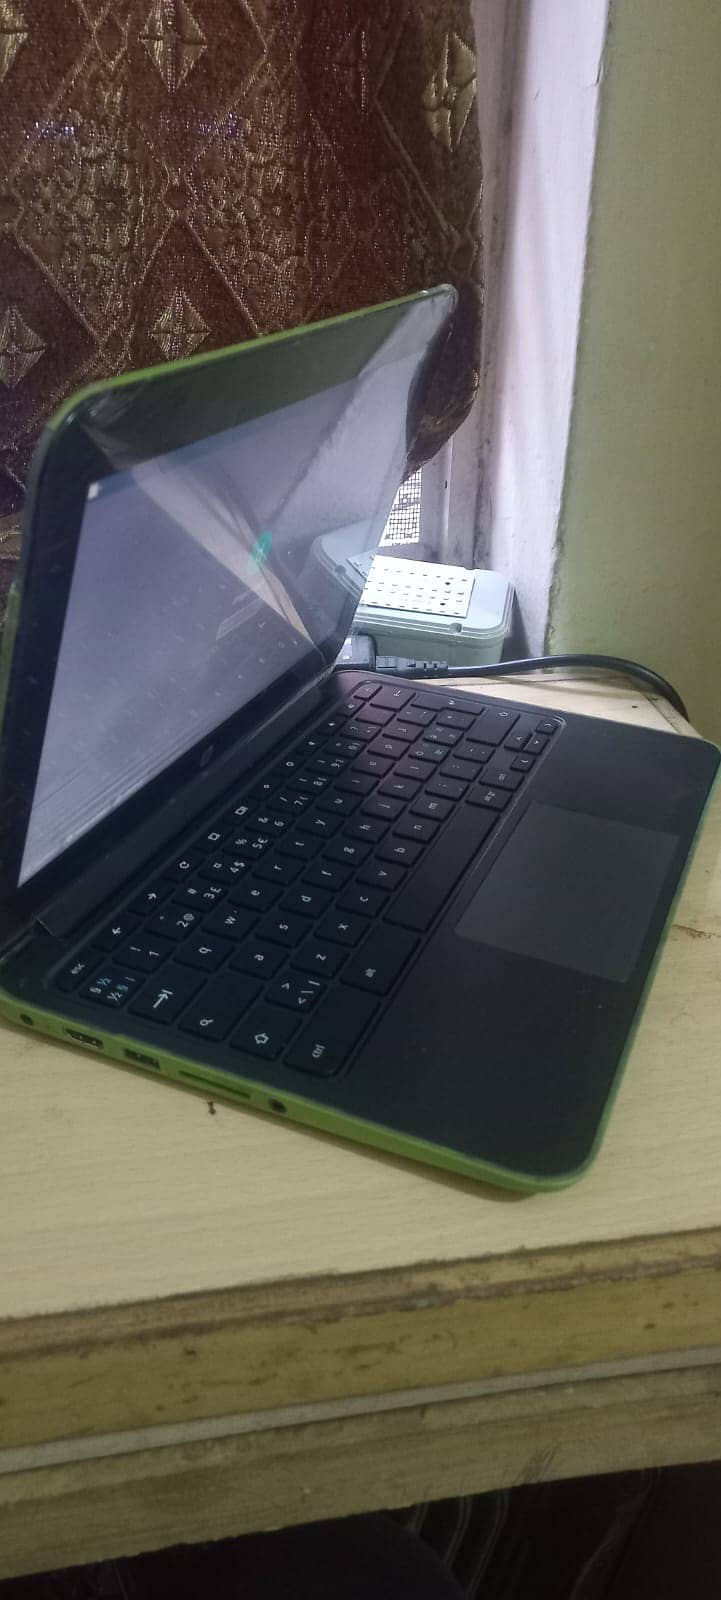 HP CHROMEBOOK G4 SERIES IN GREEN COLOR 3